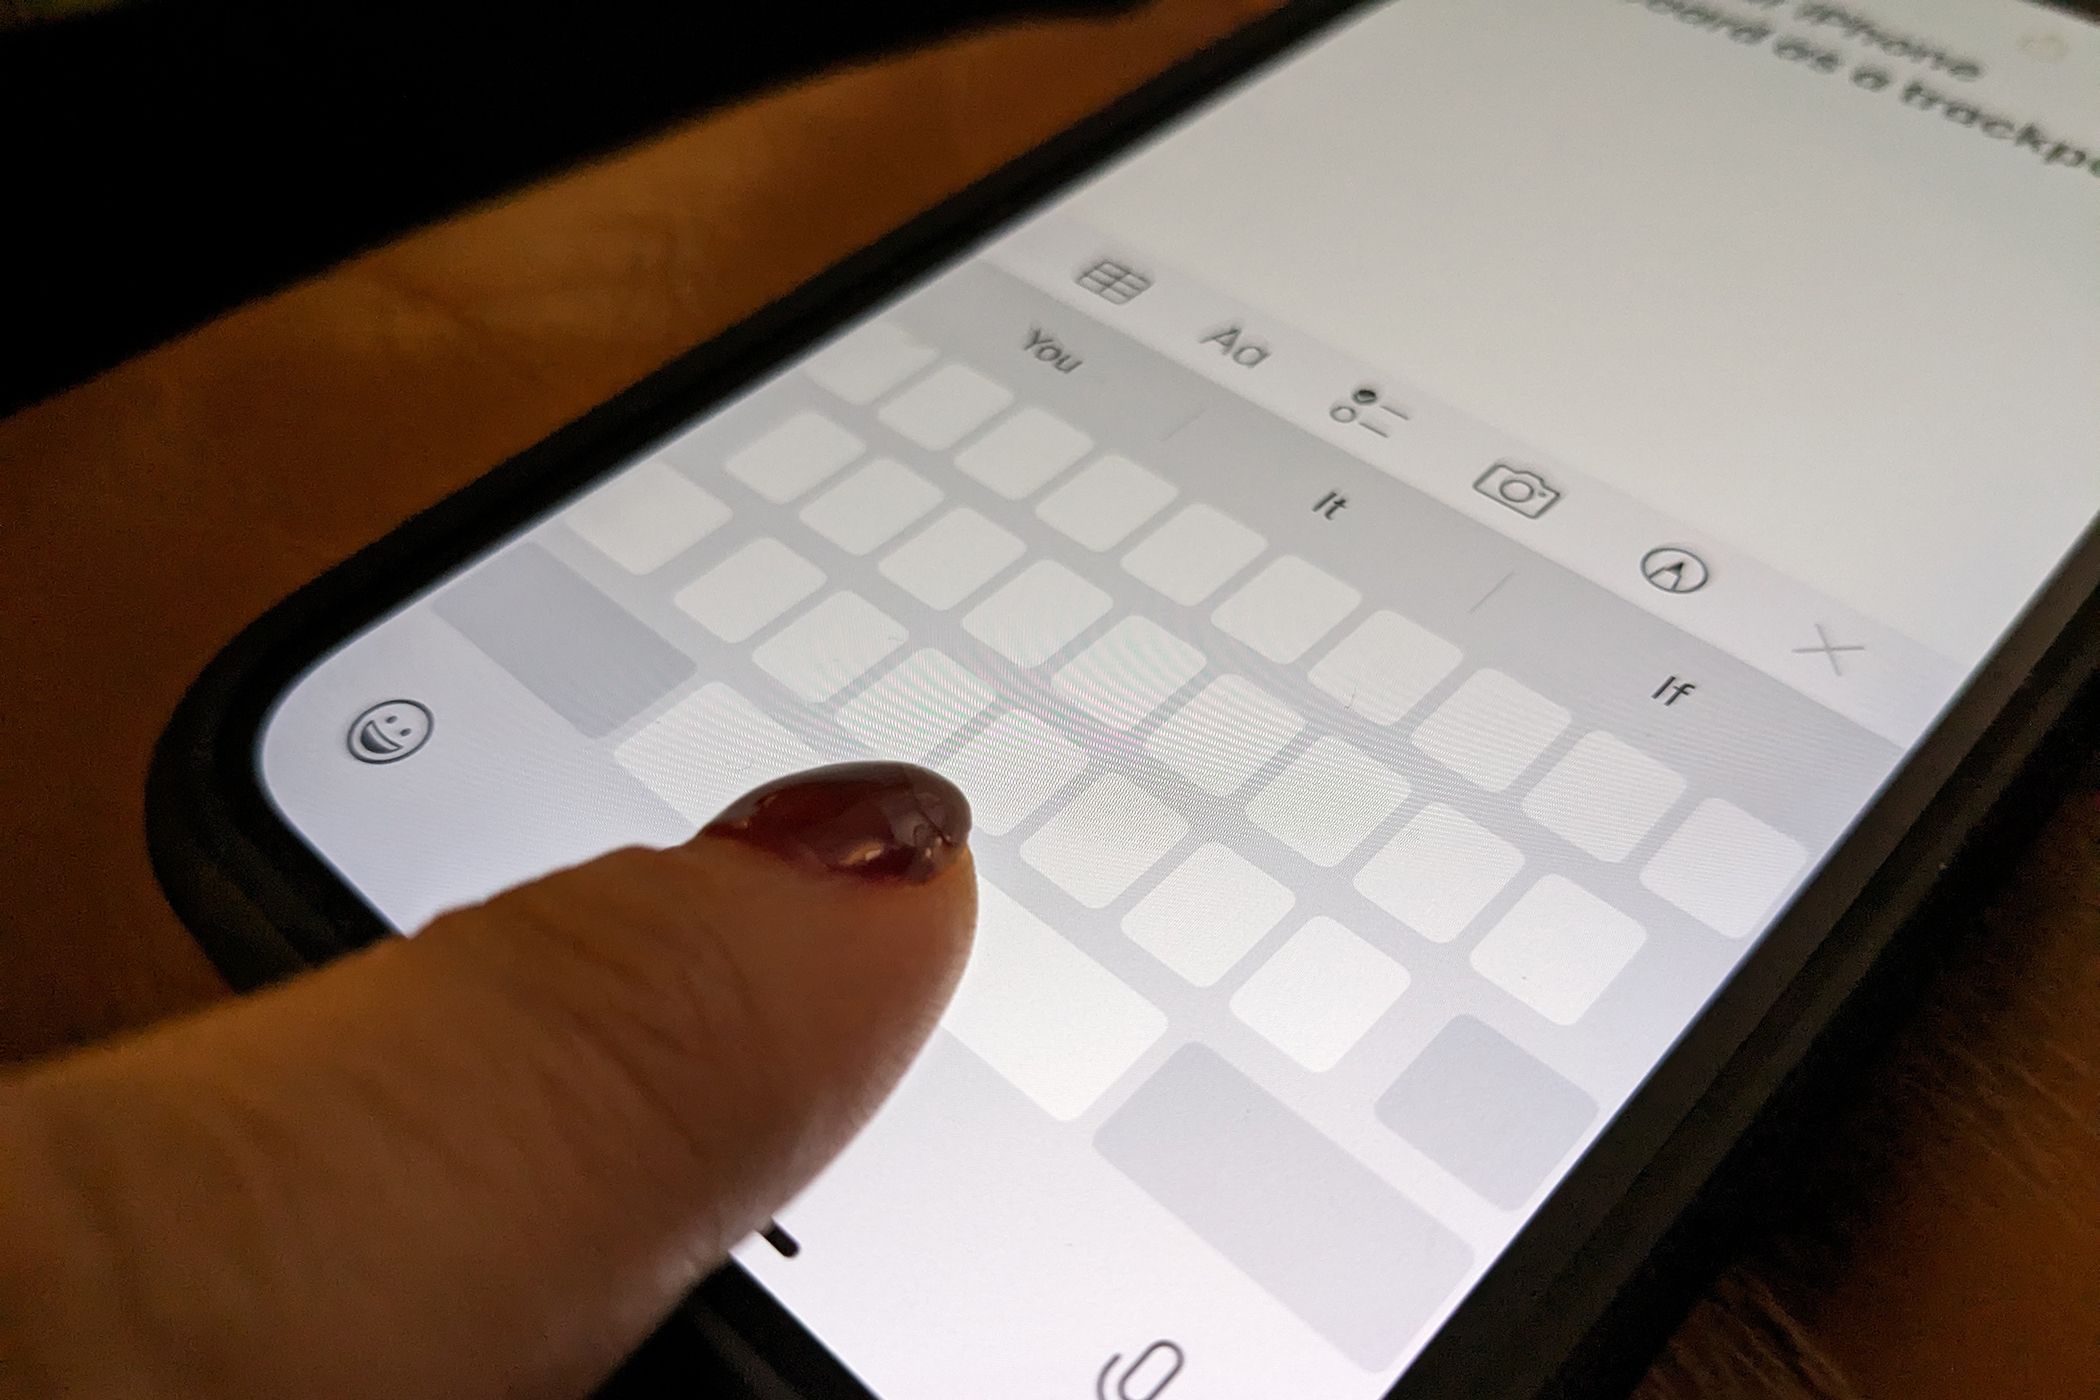 A finger on the iPhone's spacebar, turns the keyboard into a trackpad.